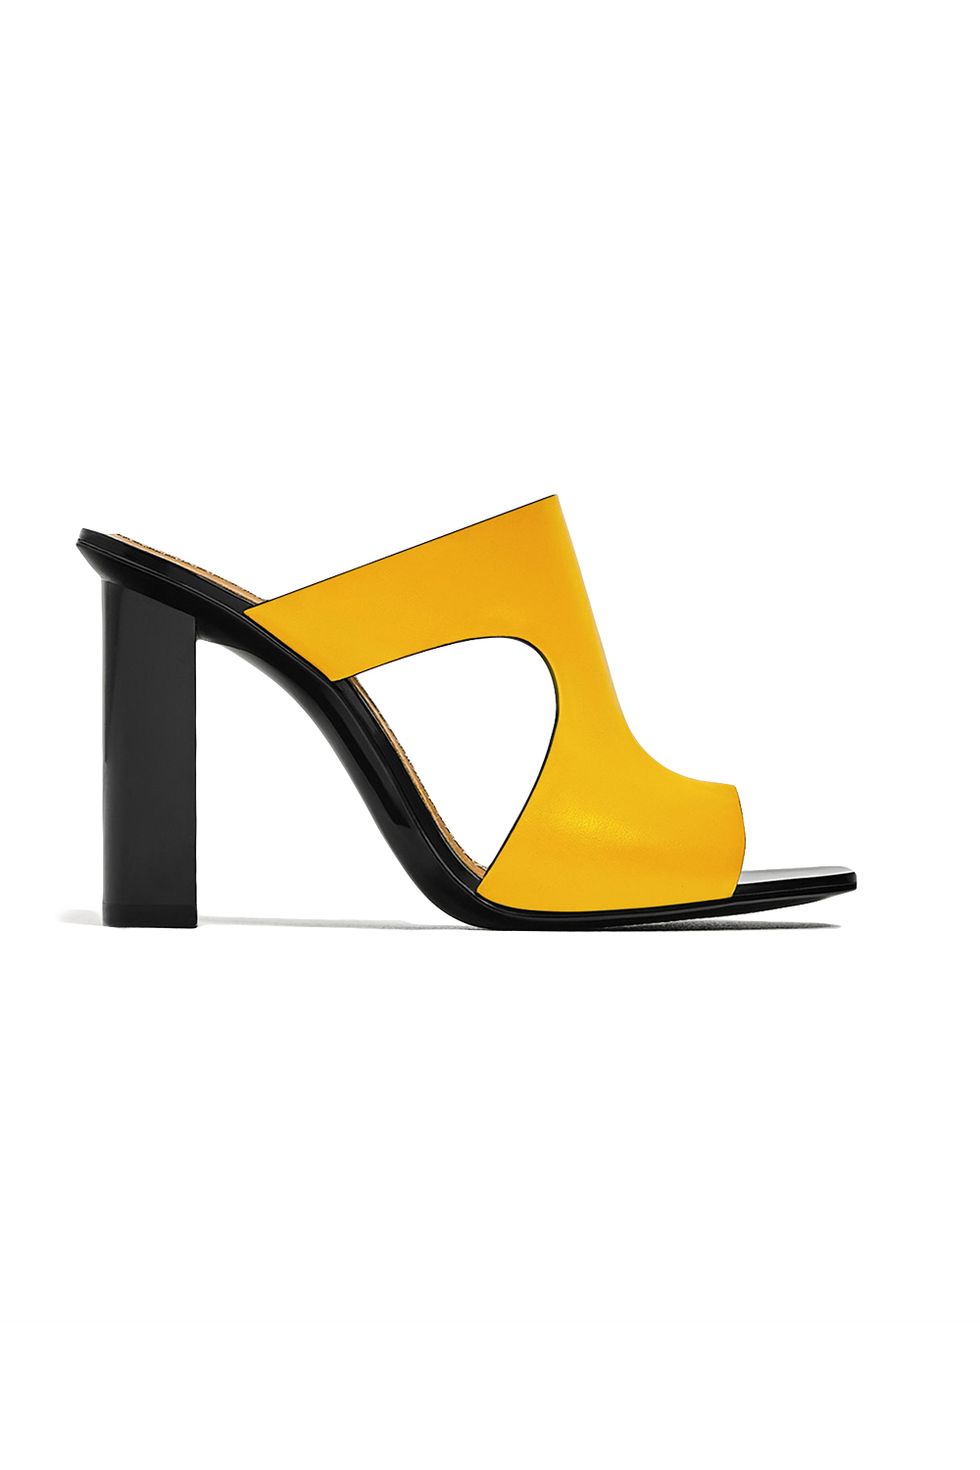 <p>They look like a piece of art—and keep your feet happy to boot.</p><p>Leather High Heel Sandals, $69.90; <a href="http://www.zara.com/us/en/woman/shoes/view-all/leather-high-heel-sandals-c719531p4165012.html" target="_blank" data-tracking-id="recirc-text-link">zara.com</a></p>